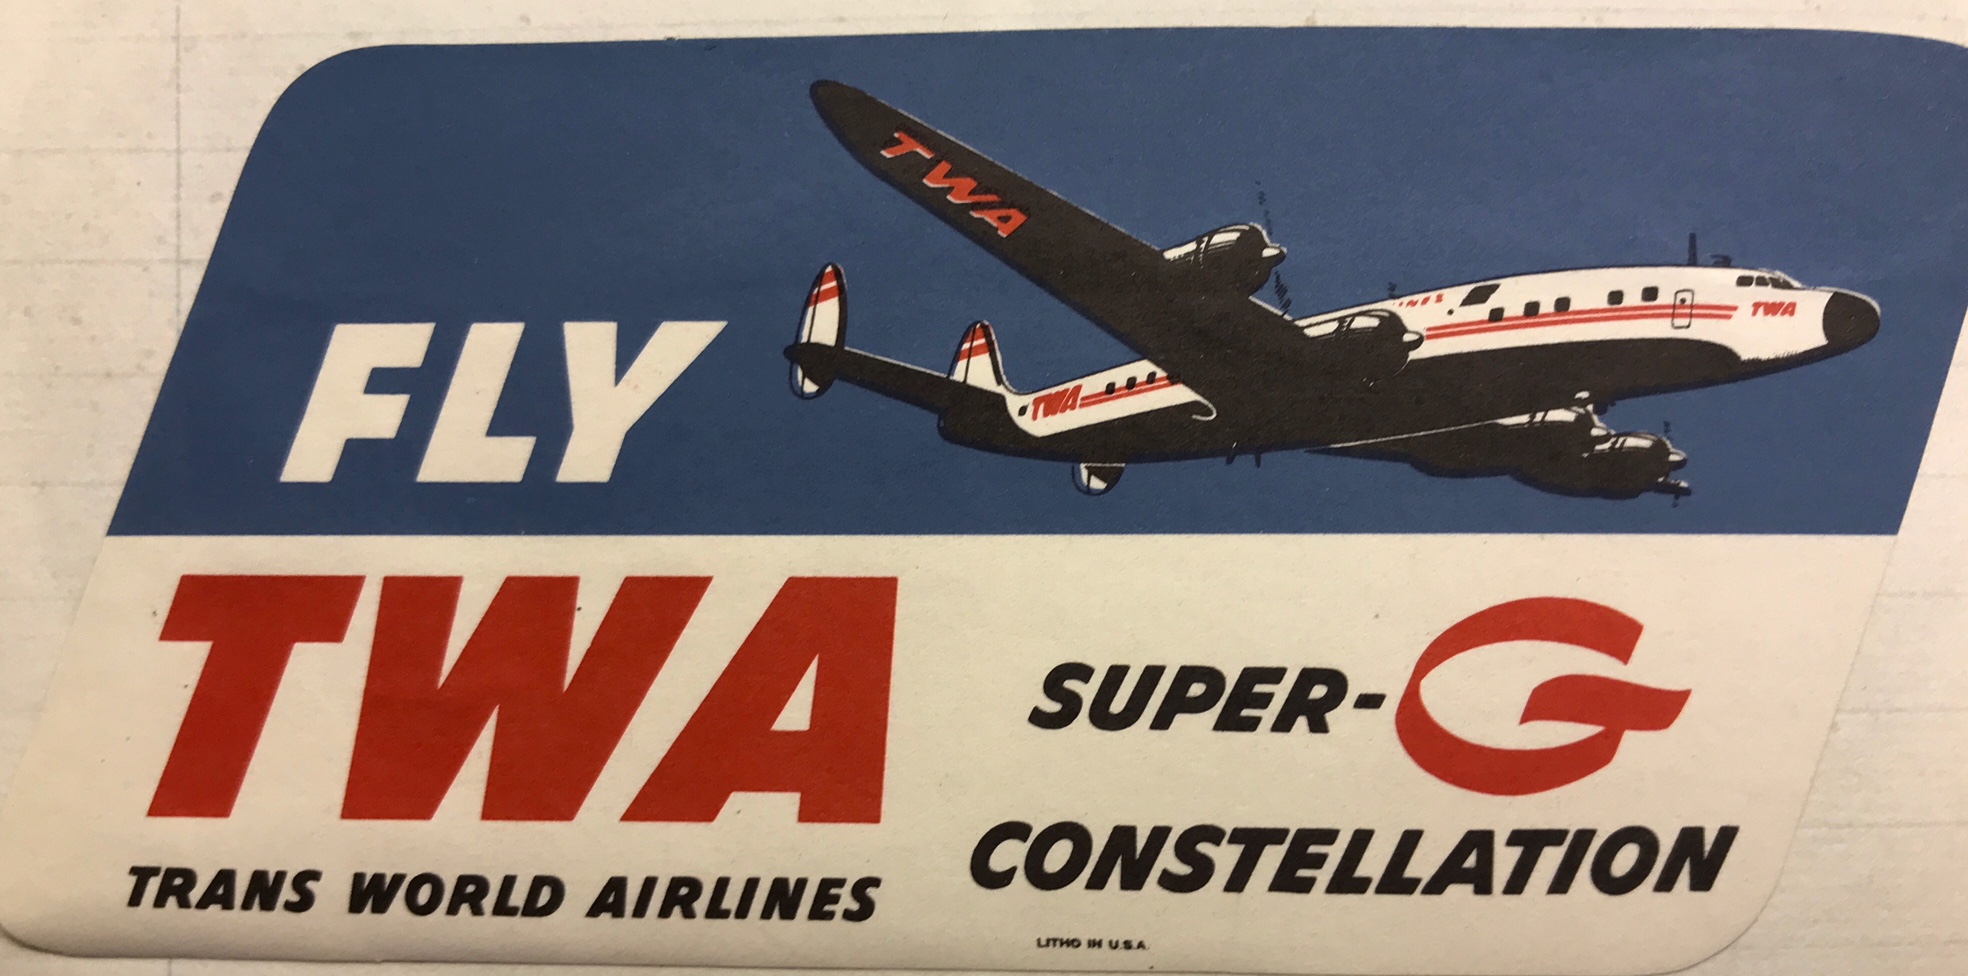 Trevor's Stickies: Trans World Airways. TWA. Bobby's favourite, for its simply beautiful Super Constellations. And the wonderful sound of four Wright radial engines as they floated down to land at Heathrow. Another long story. But bankrupt. Ceased operations in 2001.